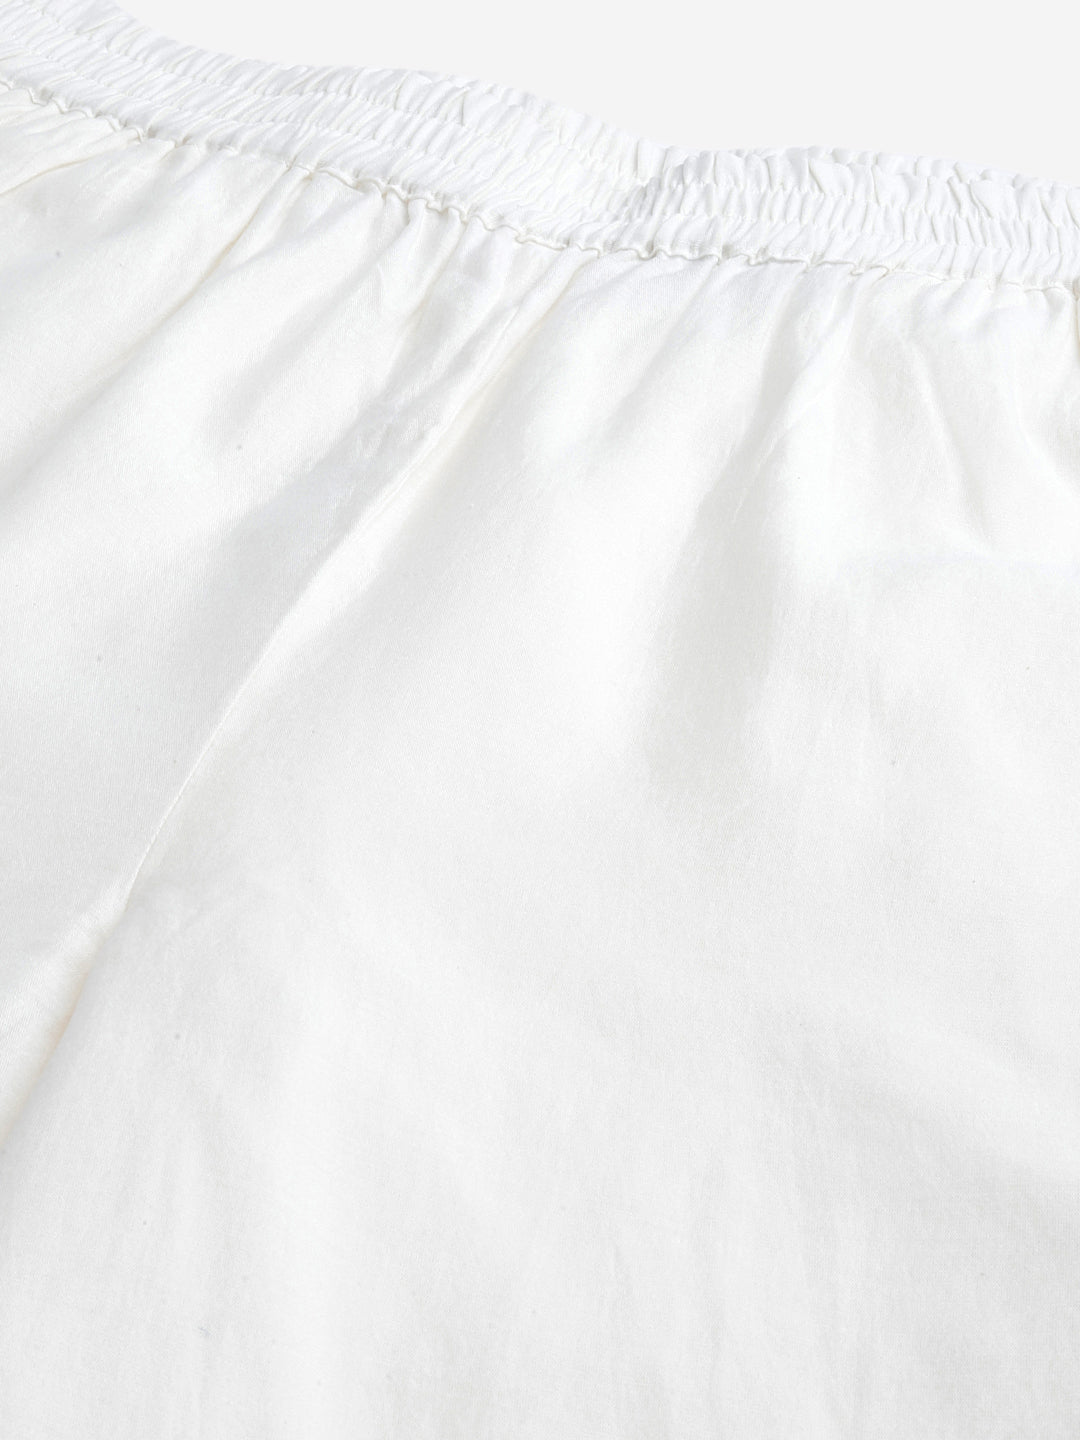 Off White Embroidered Chanderi Pants